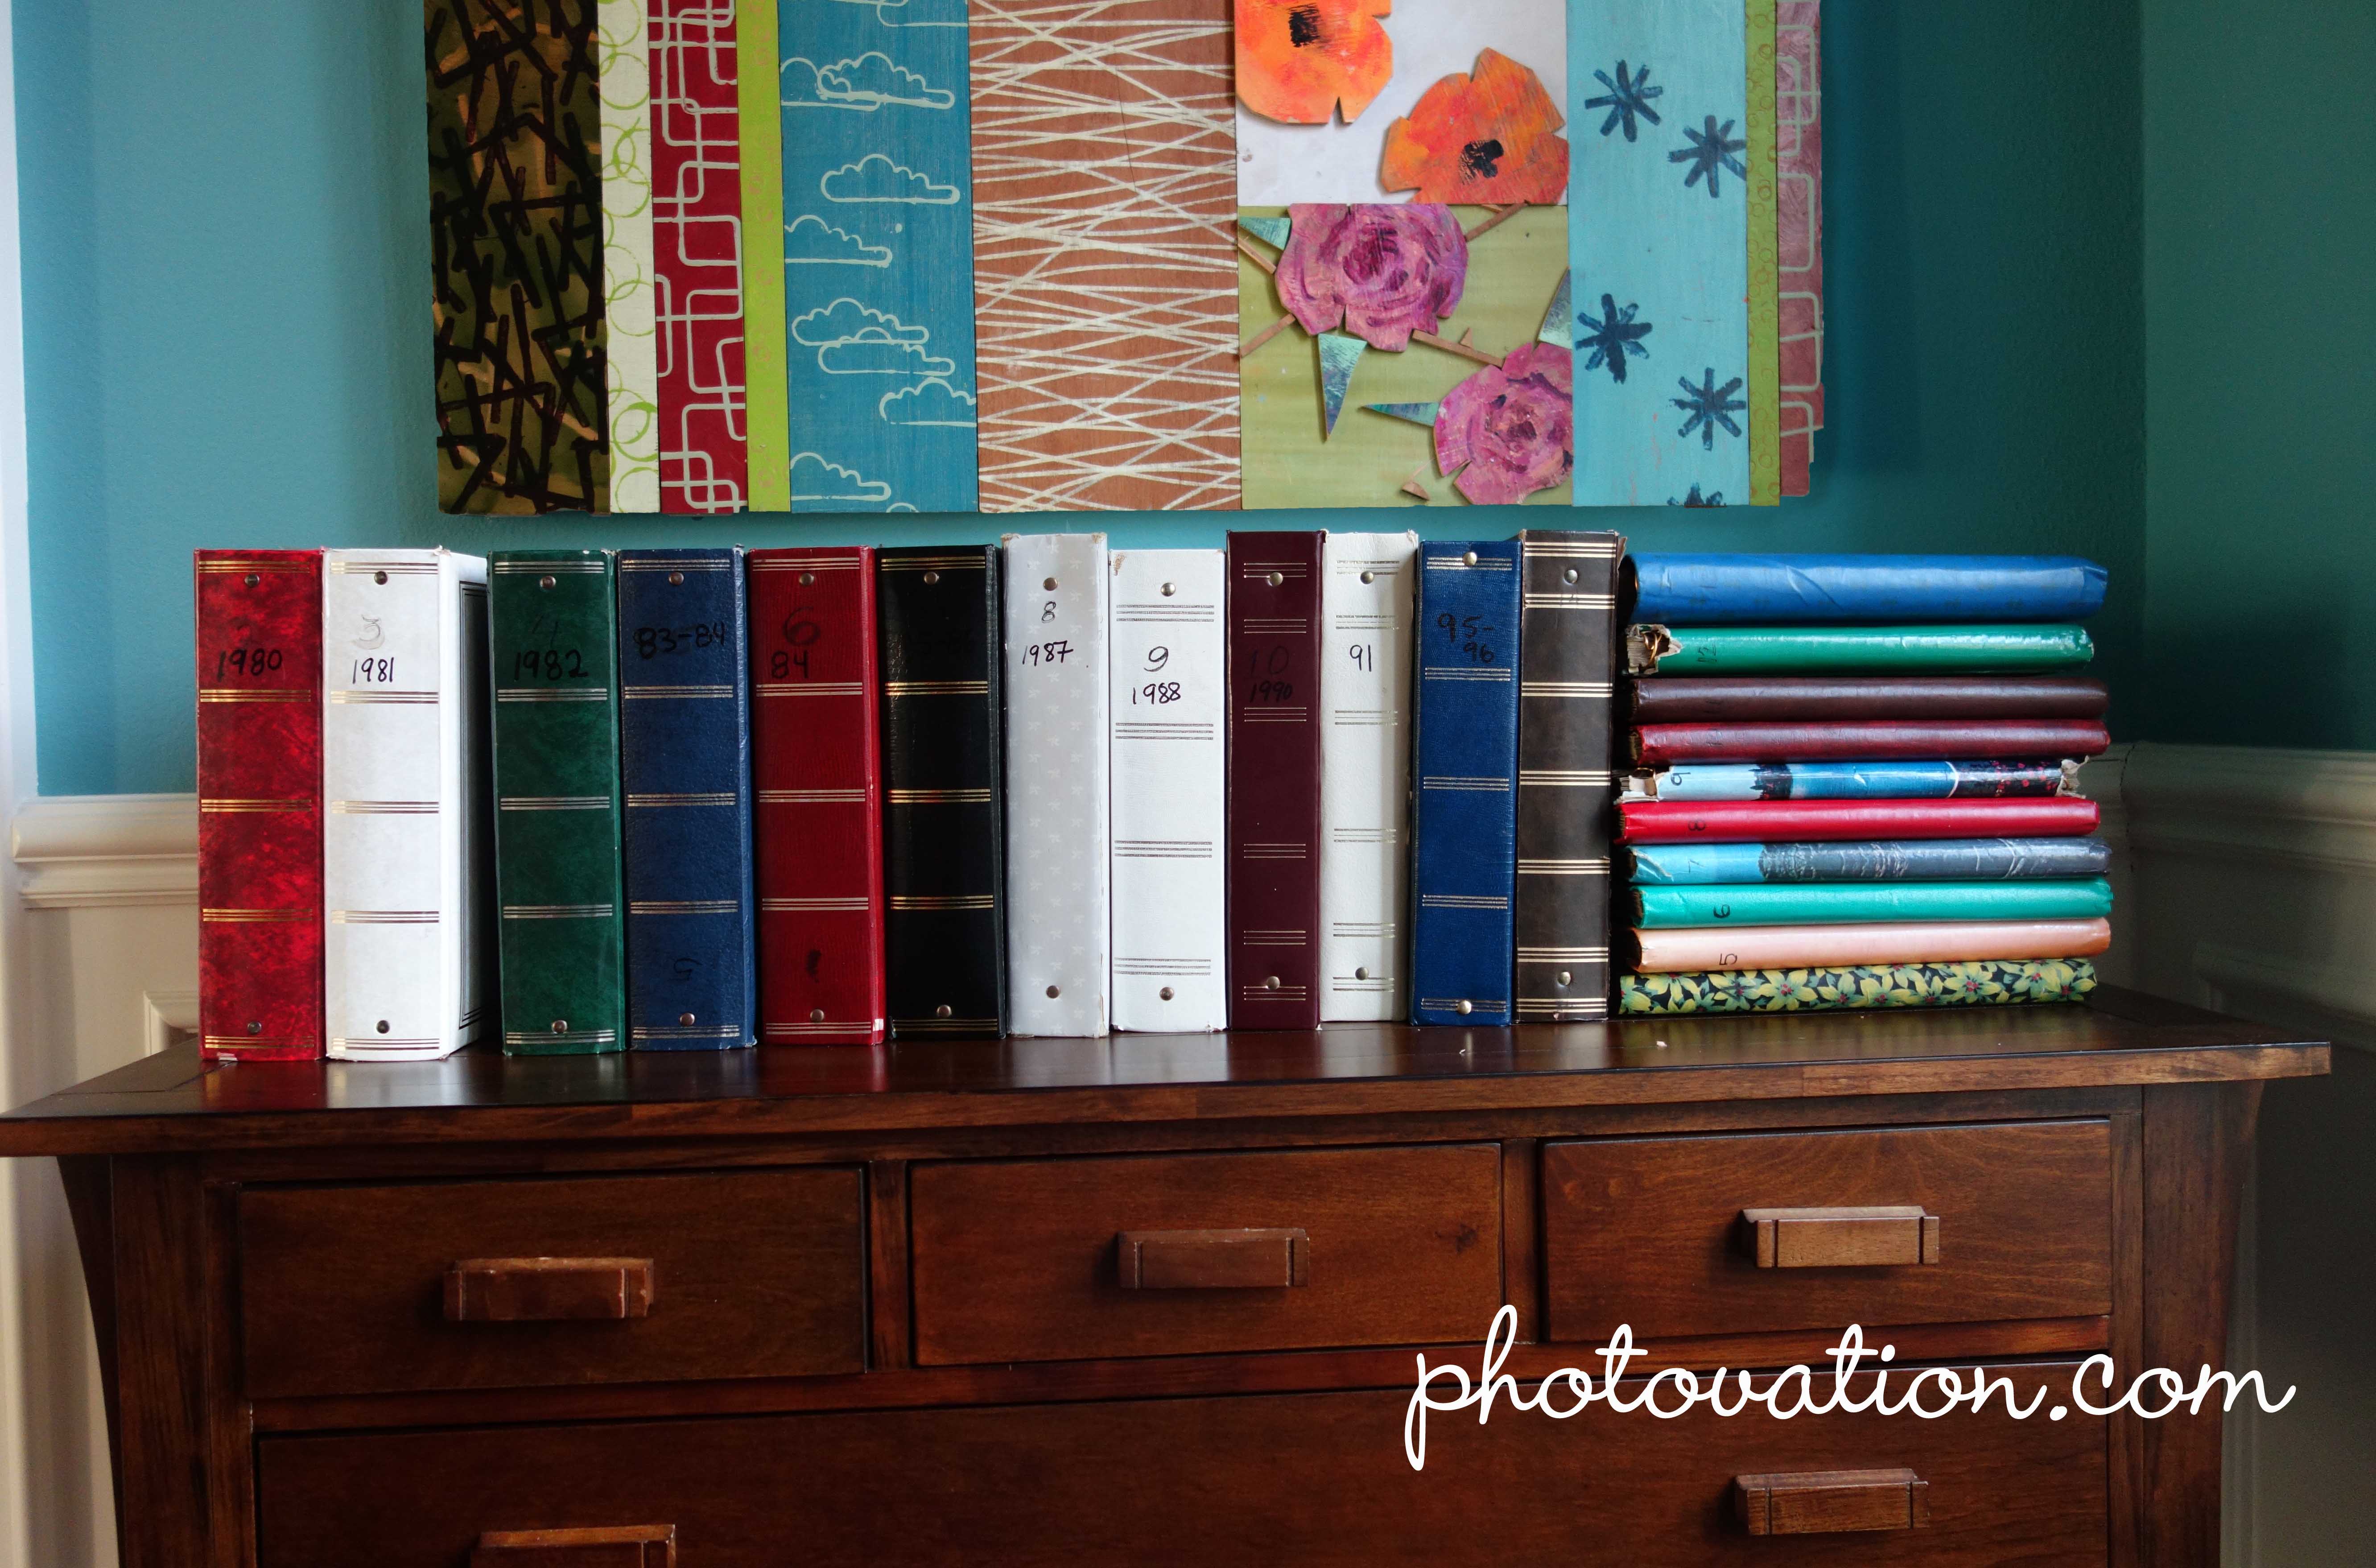 5 Steps to Preserve Photos Stored in Magnetic Photo Albums